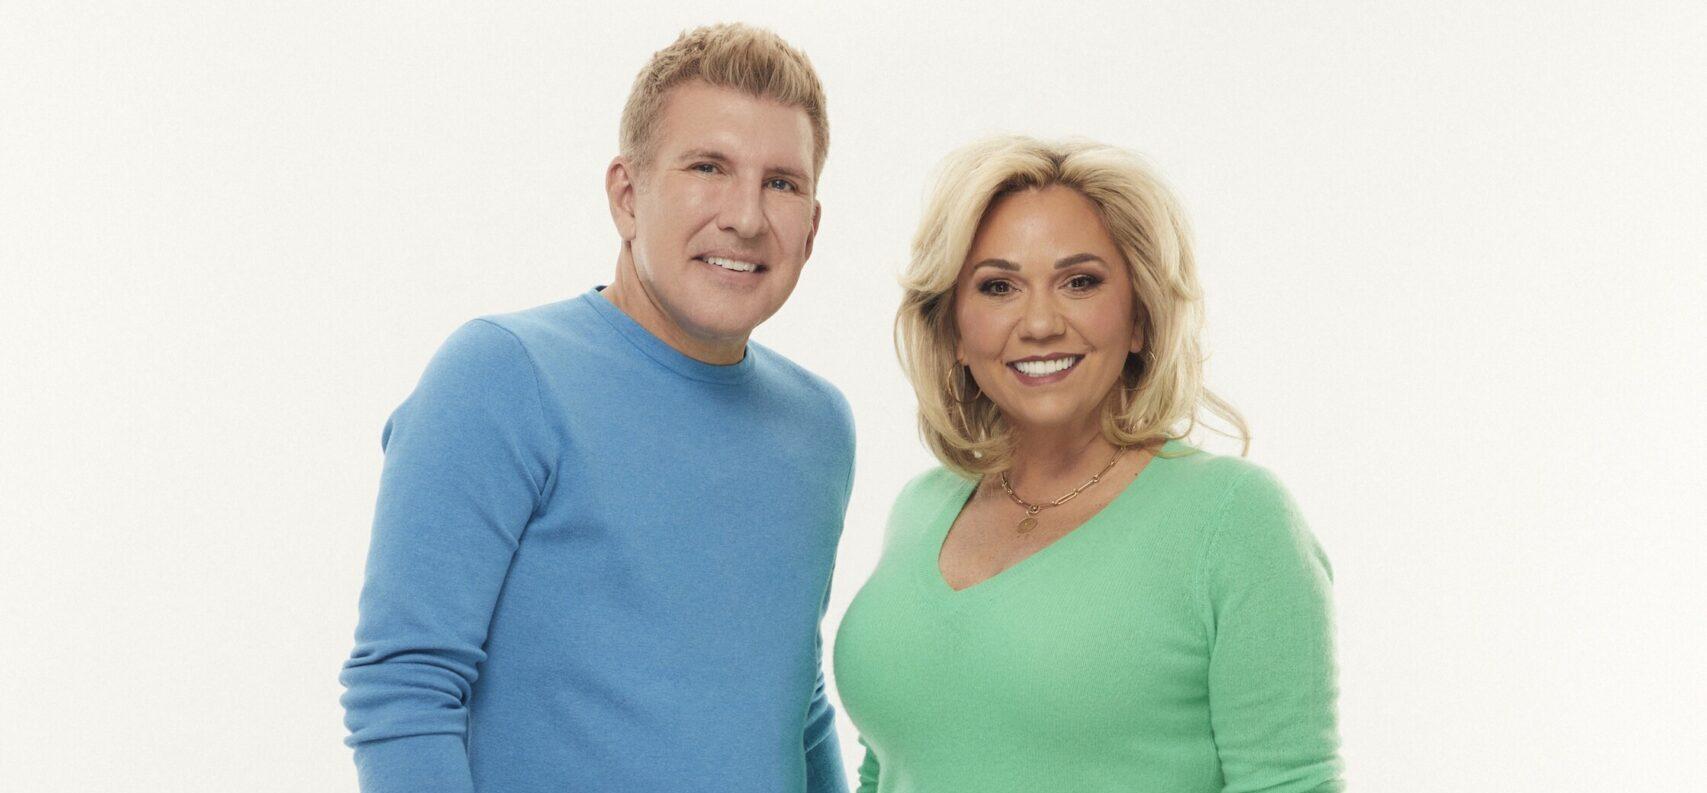 Will New Chrisley Show Film Savannah And Her Siblings Visiting Jailed Parents?